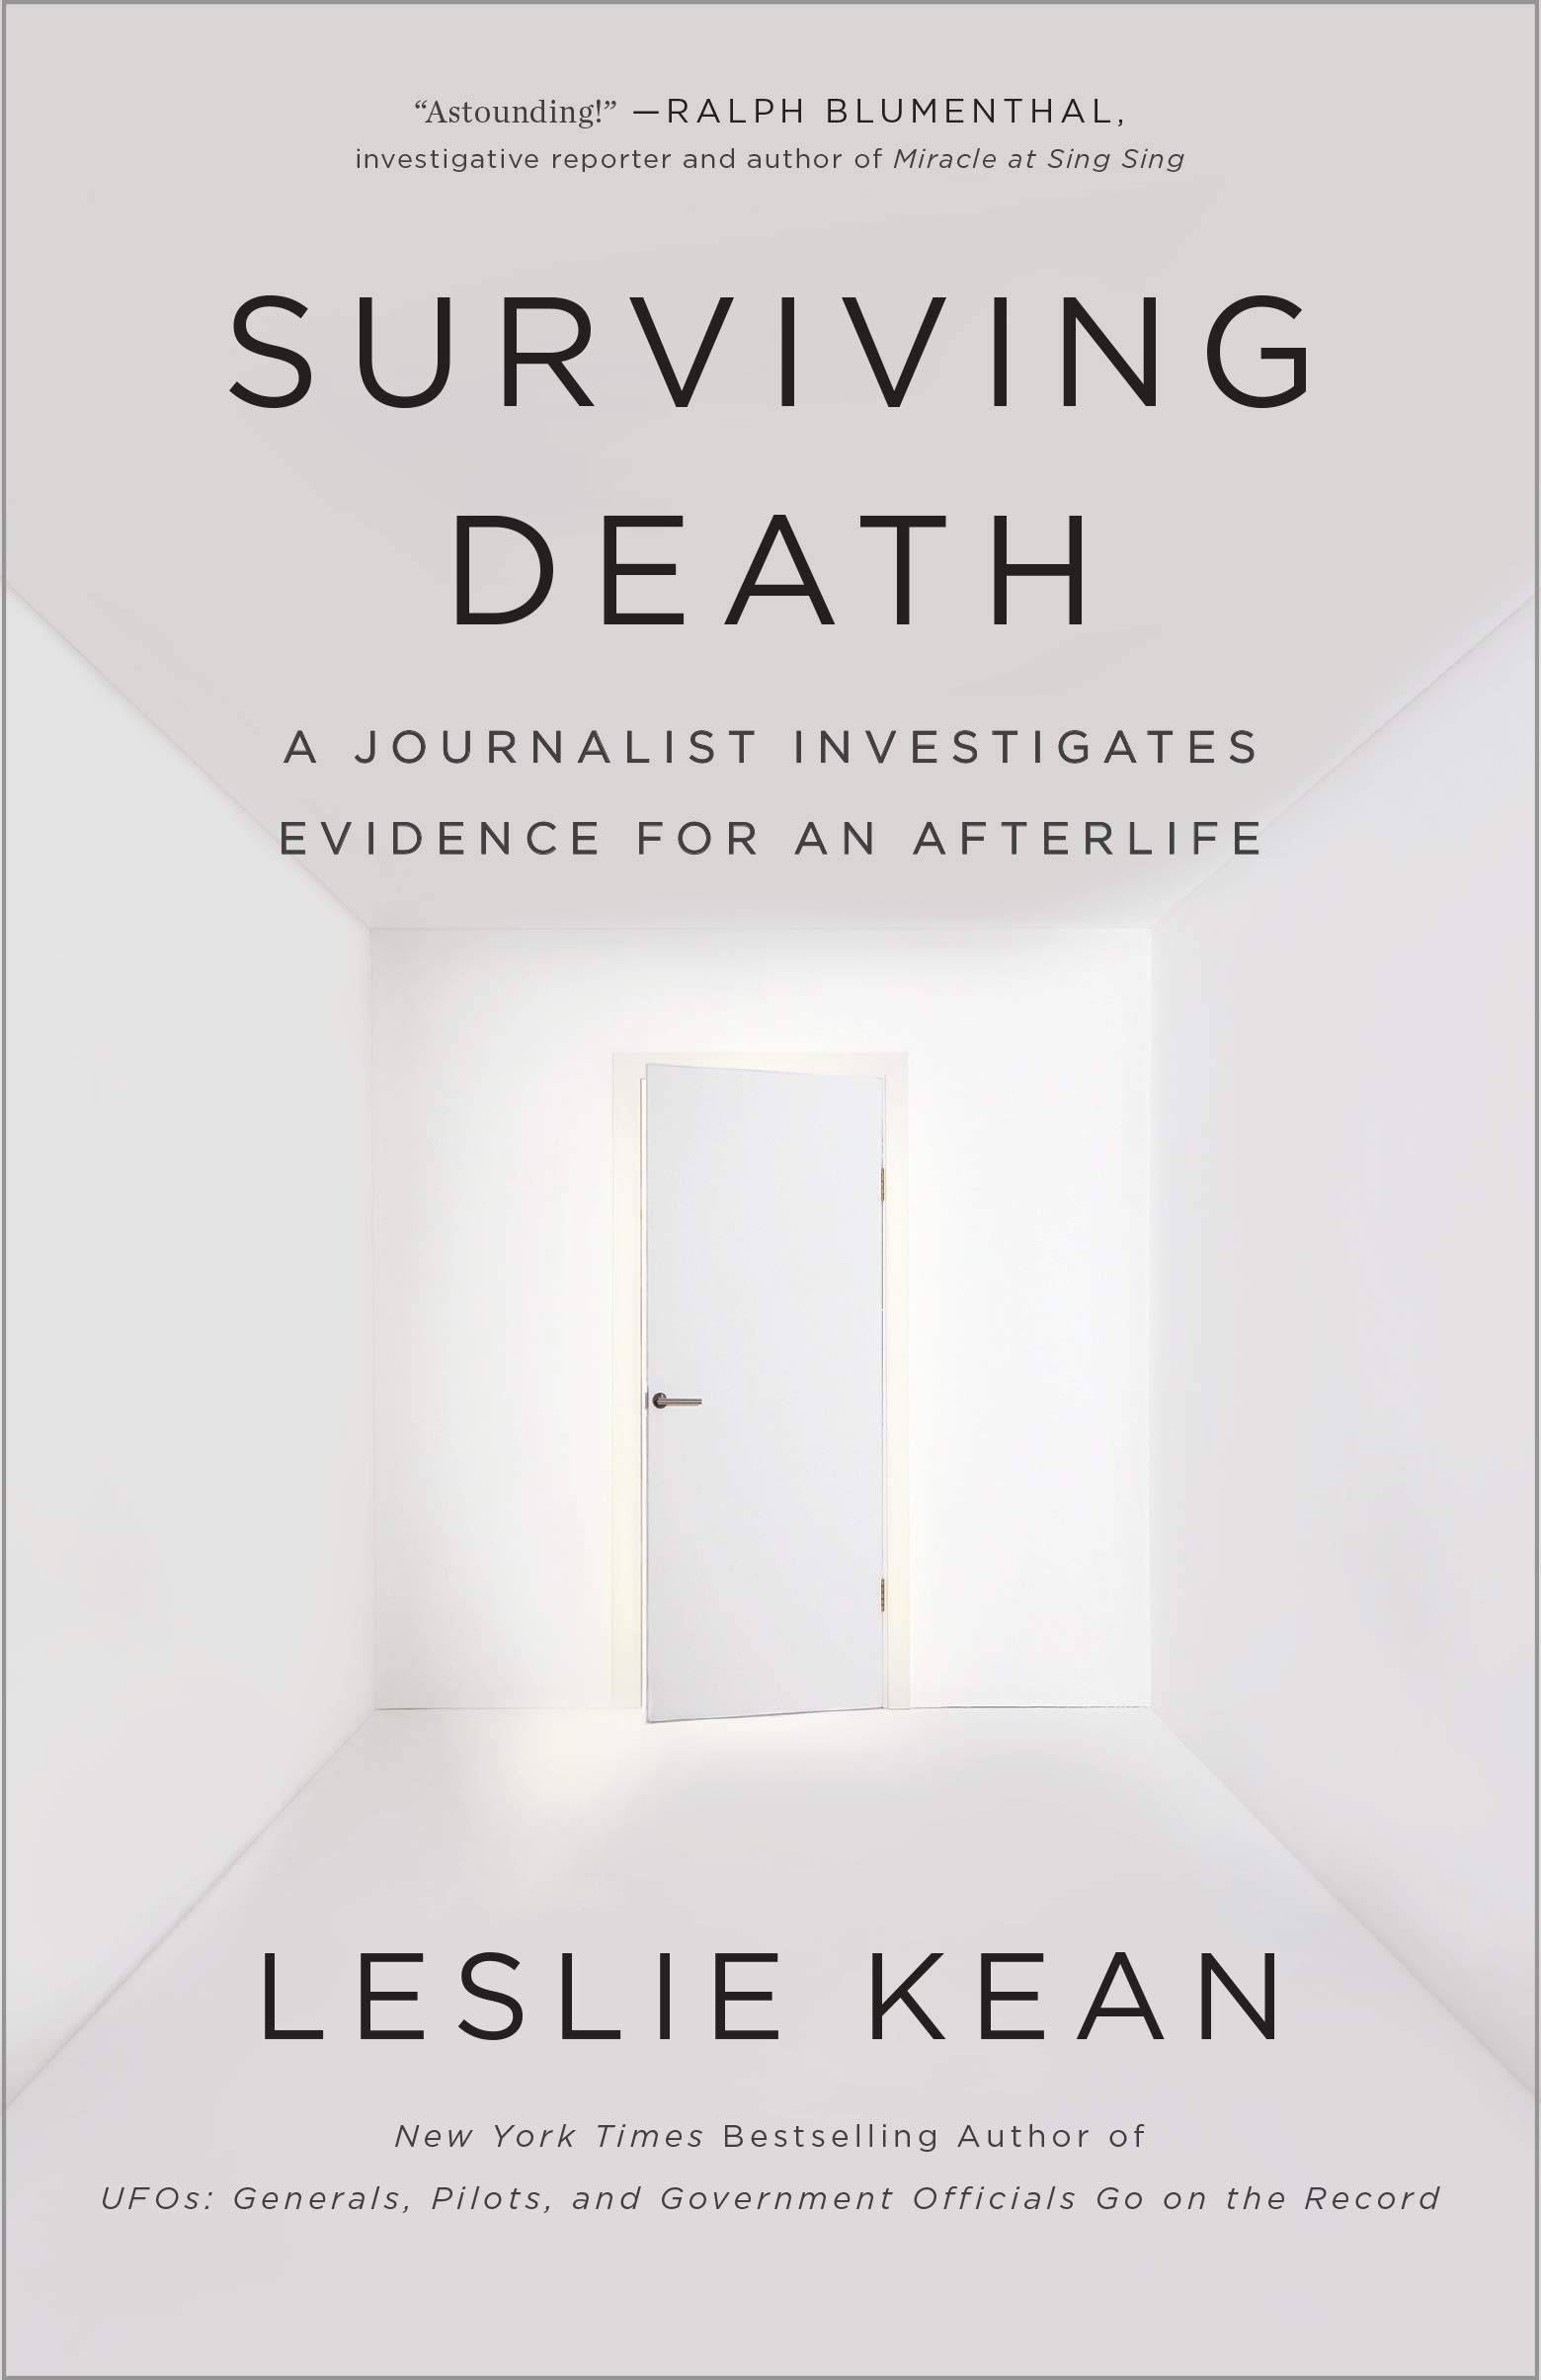 Surviving Death: A Journalist Investigates Evidence for an Afterlife, by Leslie Kean - Near-Death Experience (NDE) Books - NDE Book Reviews on Survival.ark.net.au